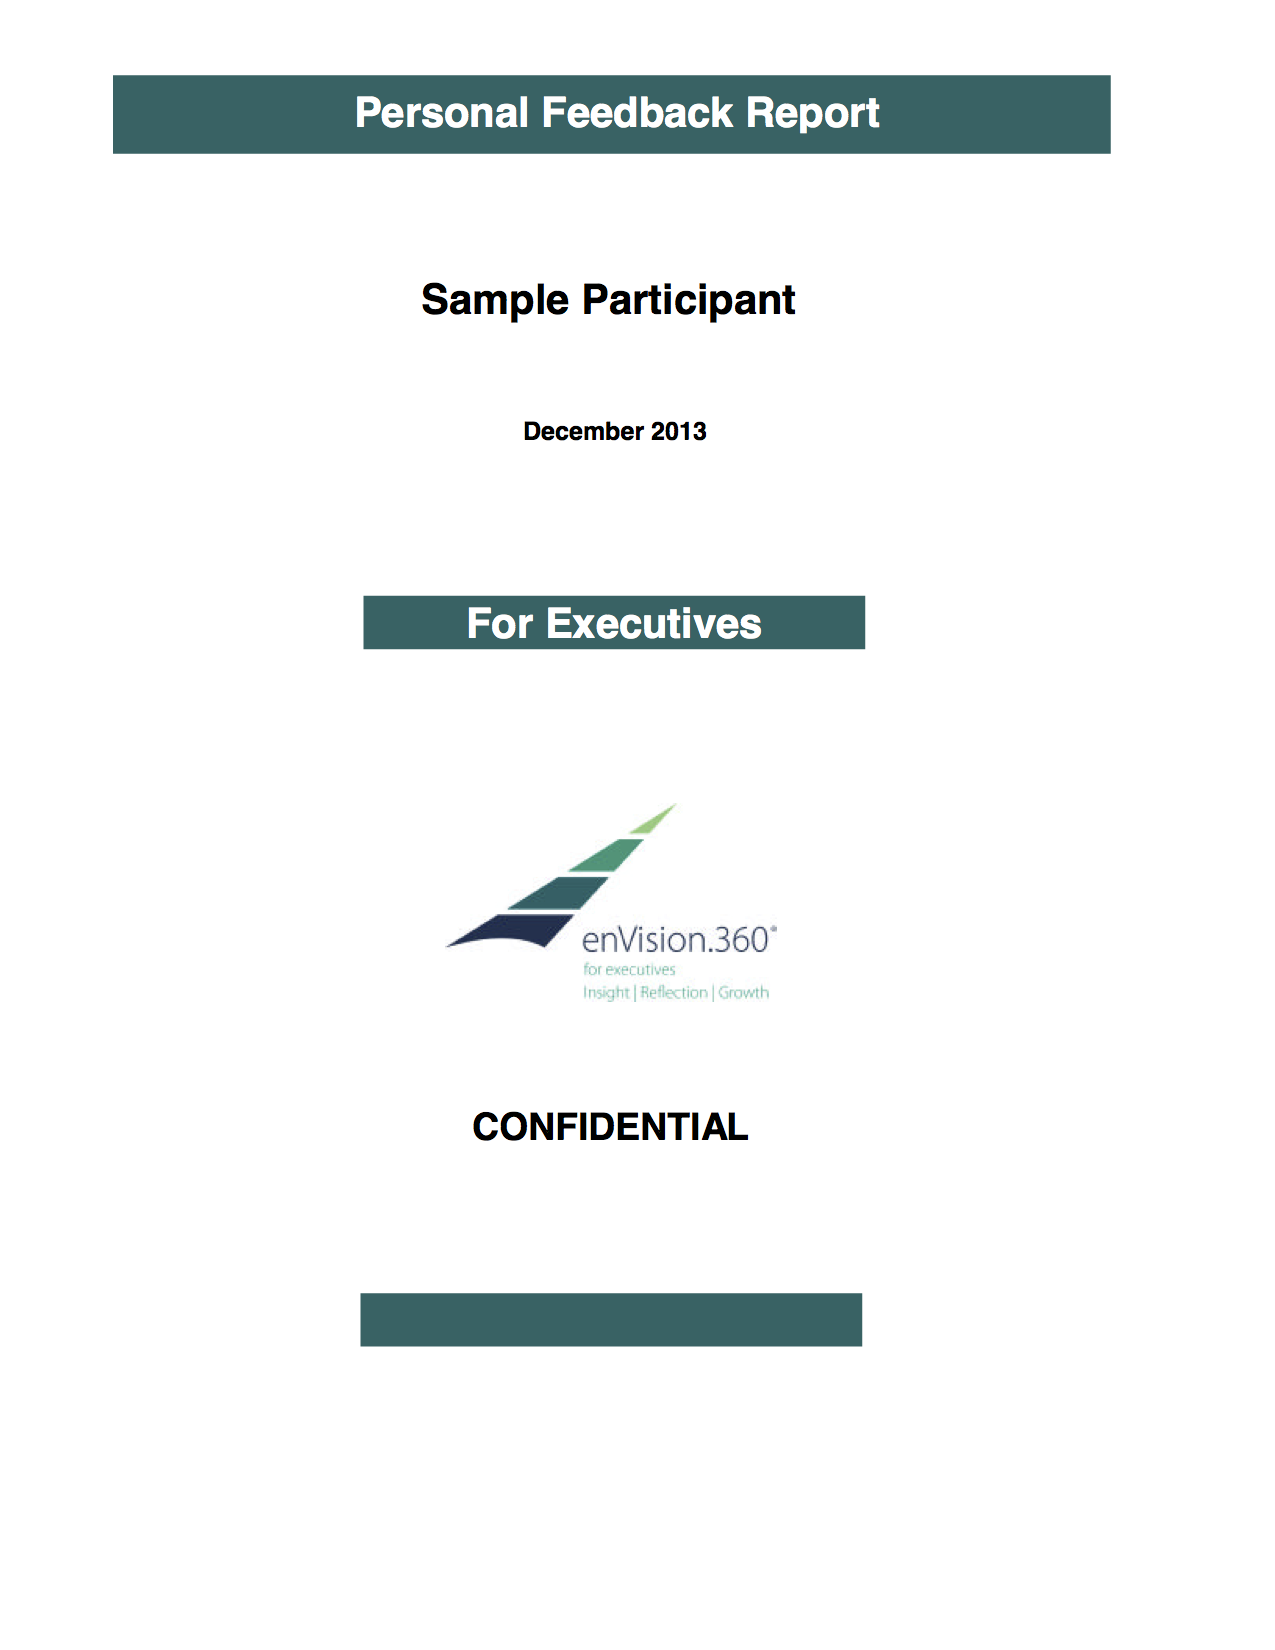 enVision.360 Sample Executive Report